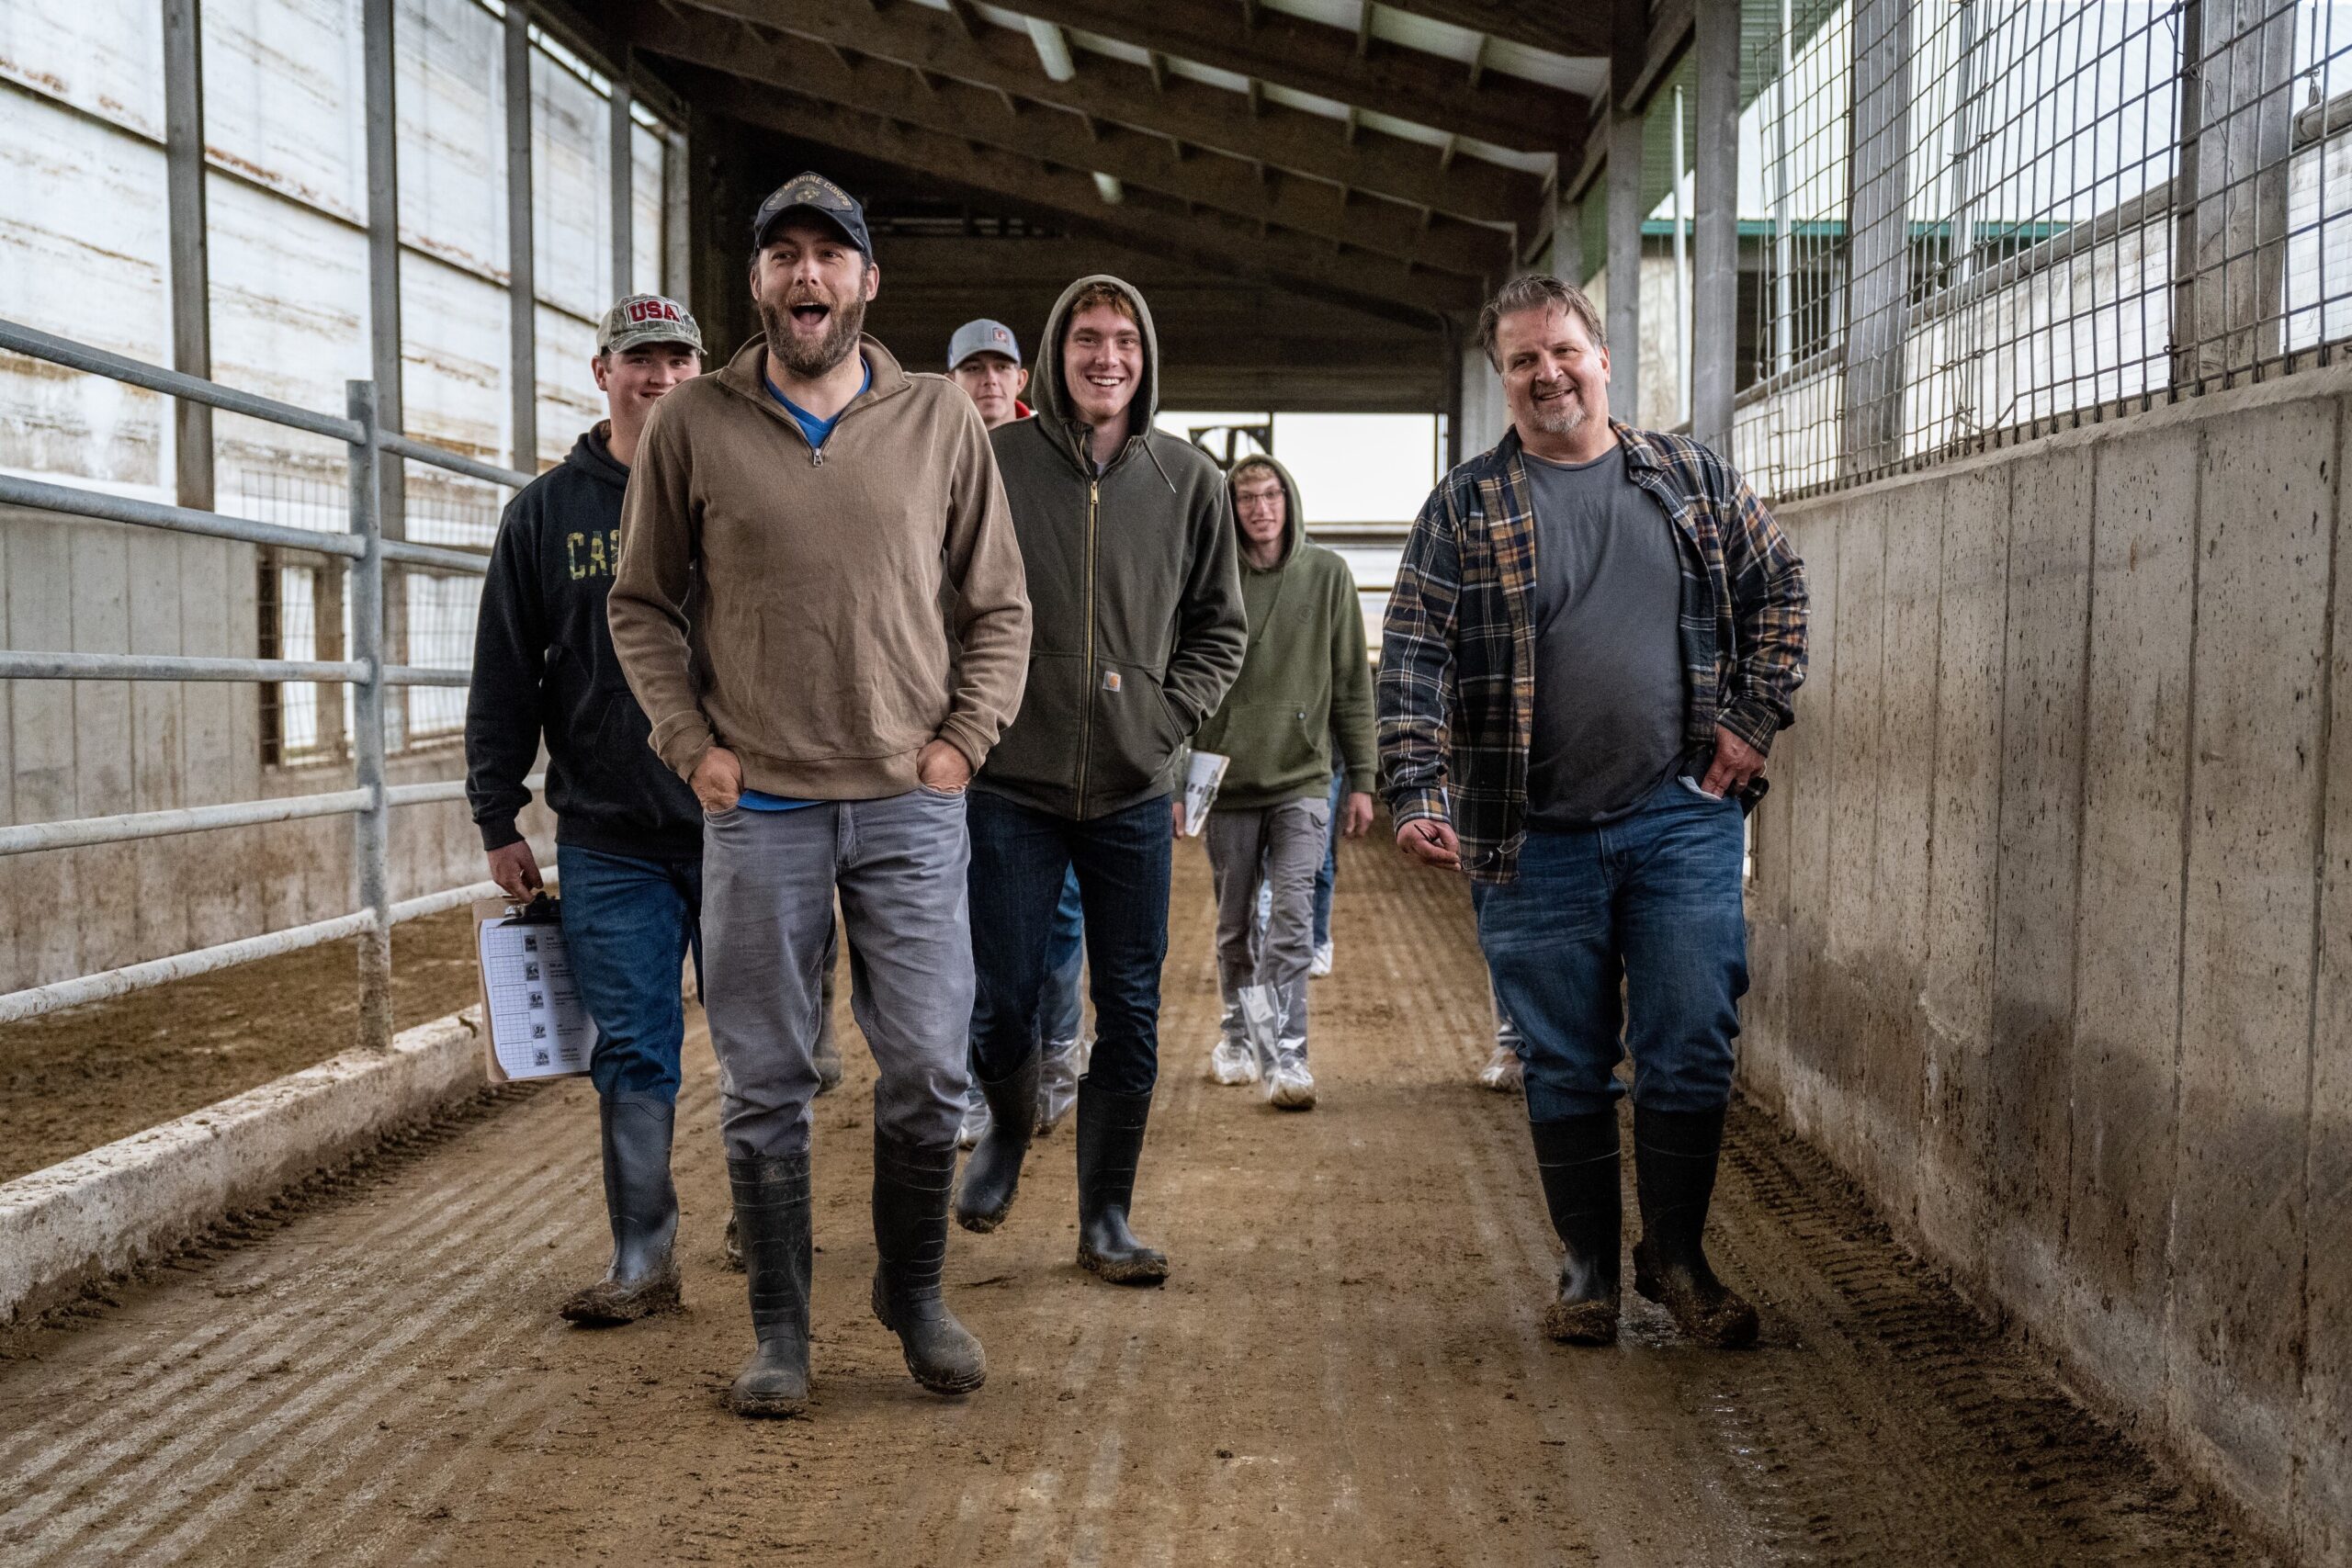 Dairy-focused Farm and Industry Short Course launches first year at UW-River Falls